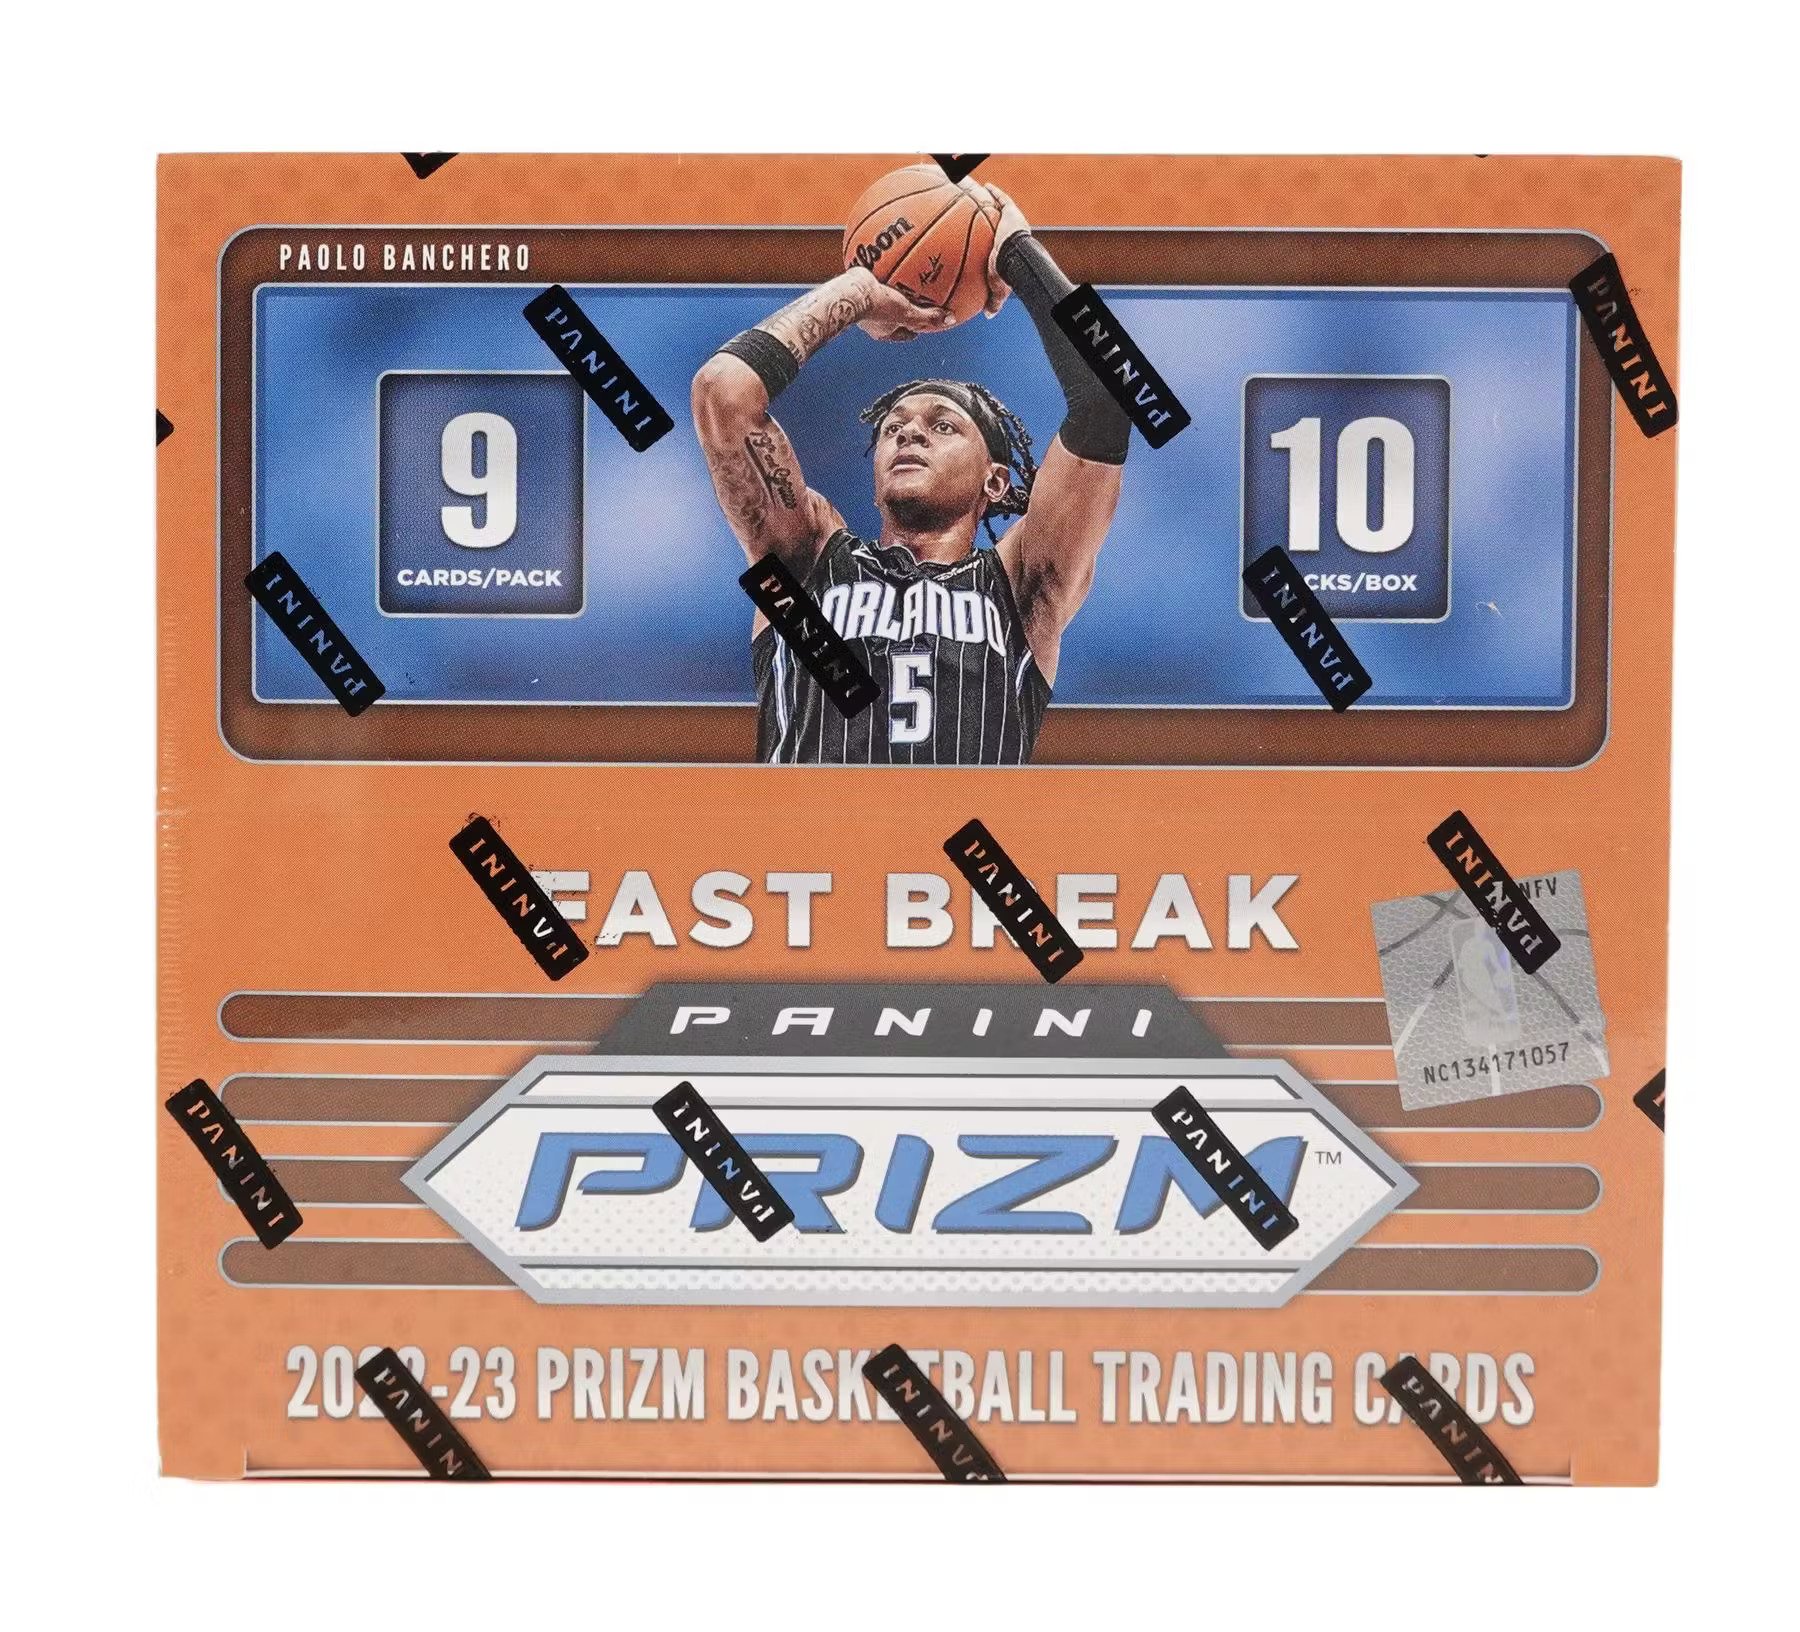 2019-20 Panini Prizm Basketball Checklist, Boxes, Reviews, Release Date